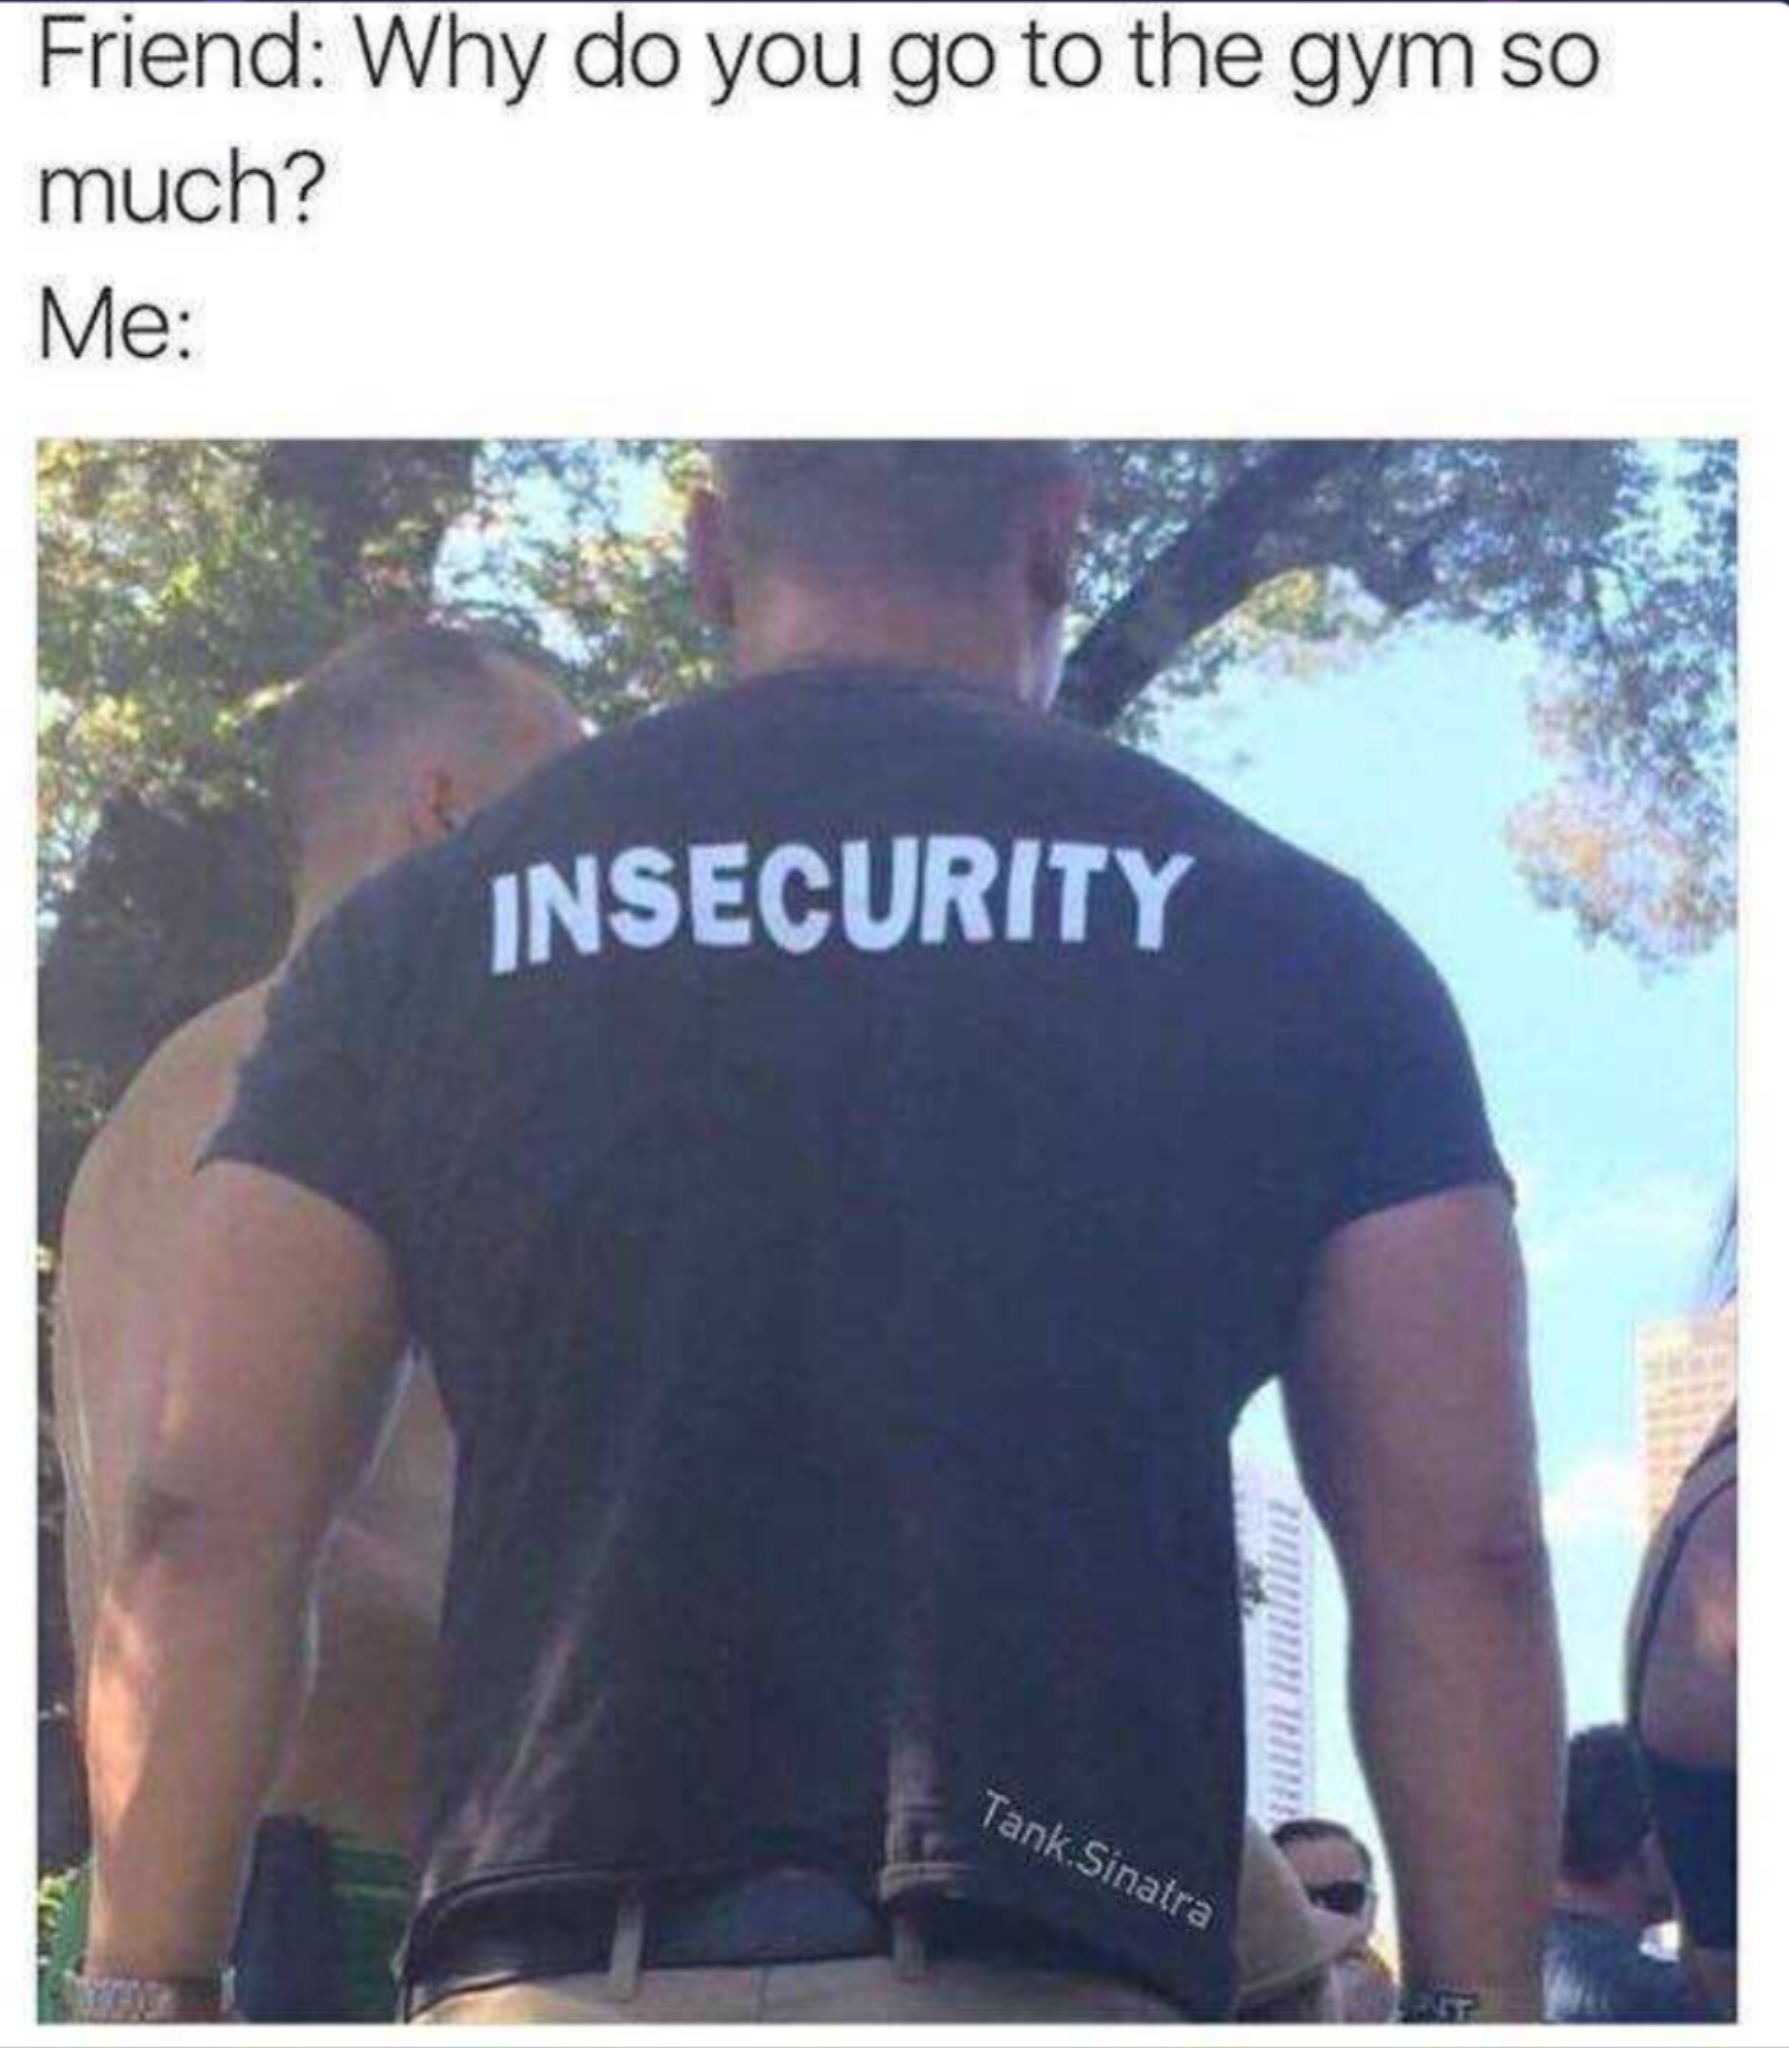 dank work out memes - Friend Why do you go to the gym so much? Me Insecurity M Tank Sinatra